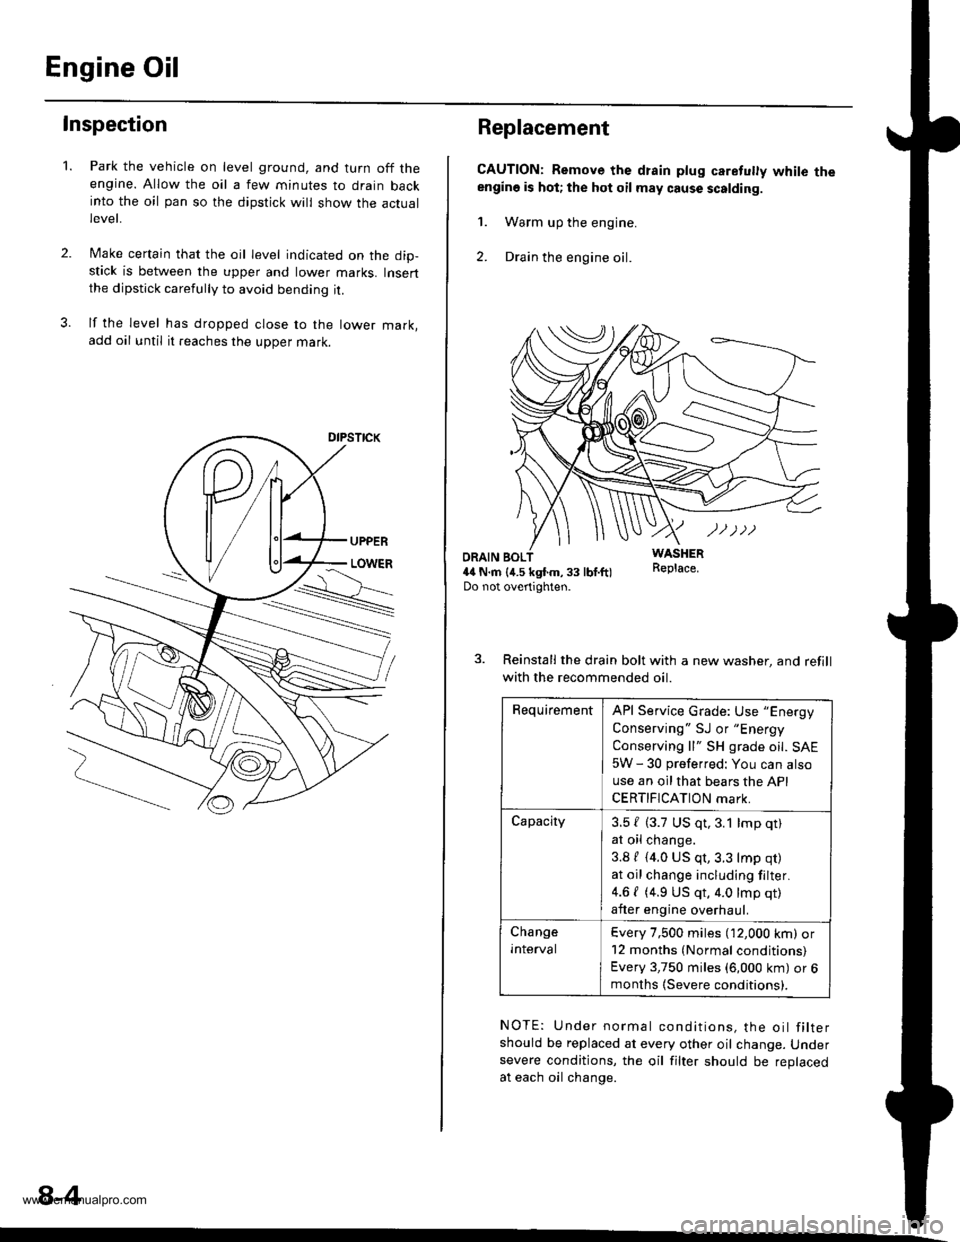 HONDA CR-V 2000 RD1-RD3 / 1.G Owners Guide 
Engine Oil
Inspection
2.
1.Park the vehicle on level ground, and turn off theengine. Allow the oil a few minutes to drain backinto the oil pan so the dipstick will show the actuallevet,
Make certain 